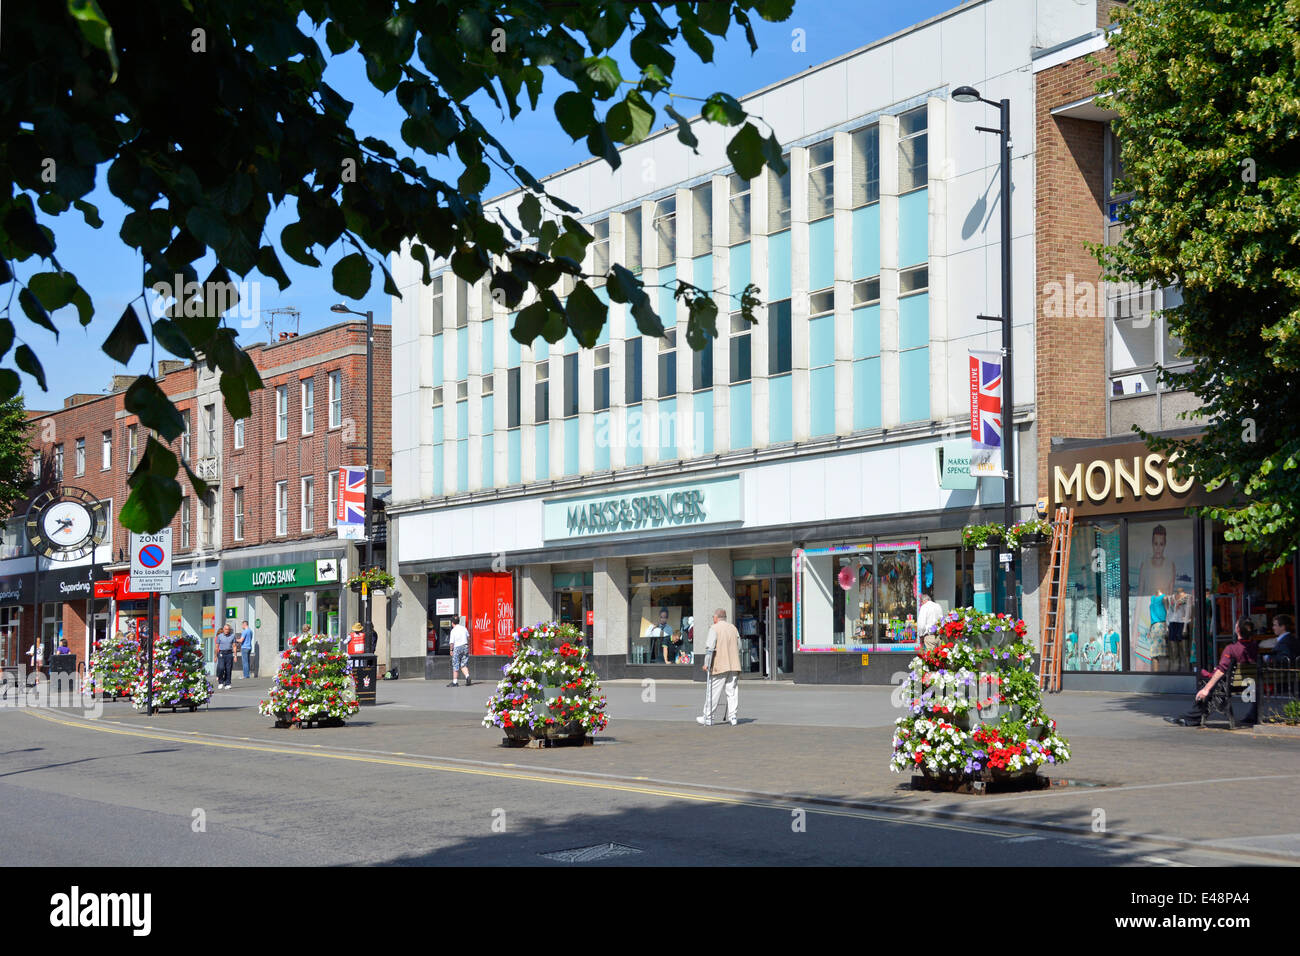 Marks and Spencers high street store with pavement floral decorations provided by local borough council Stock Photo